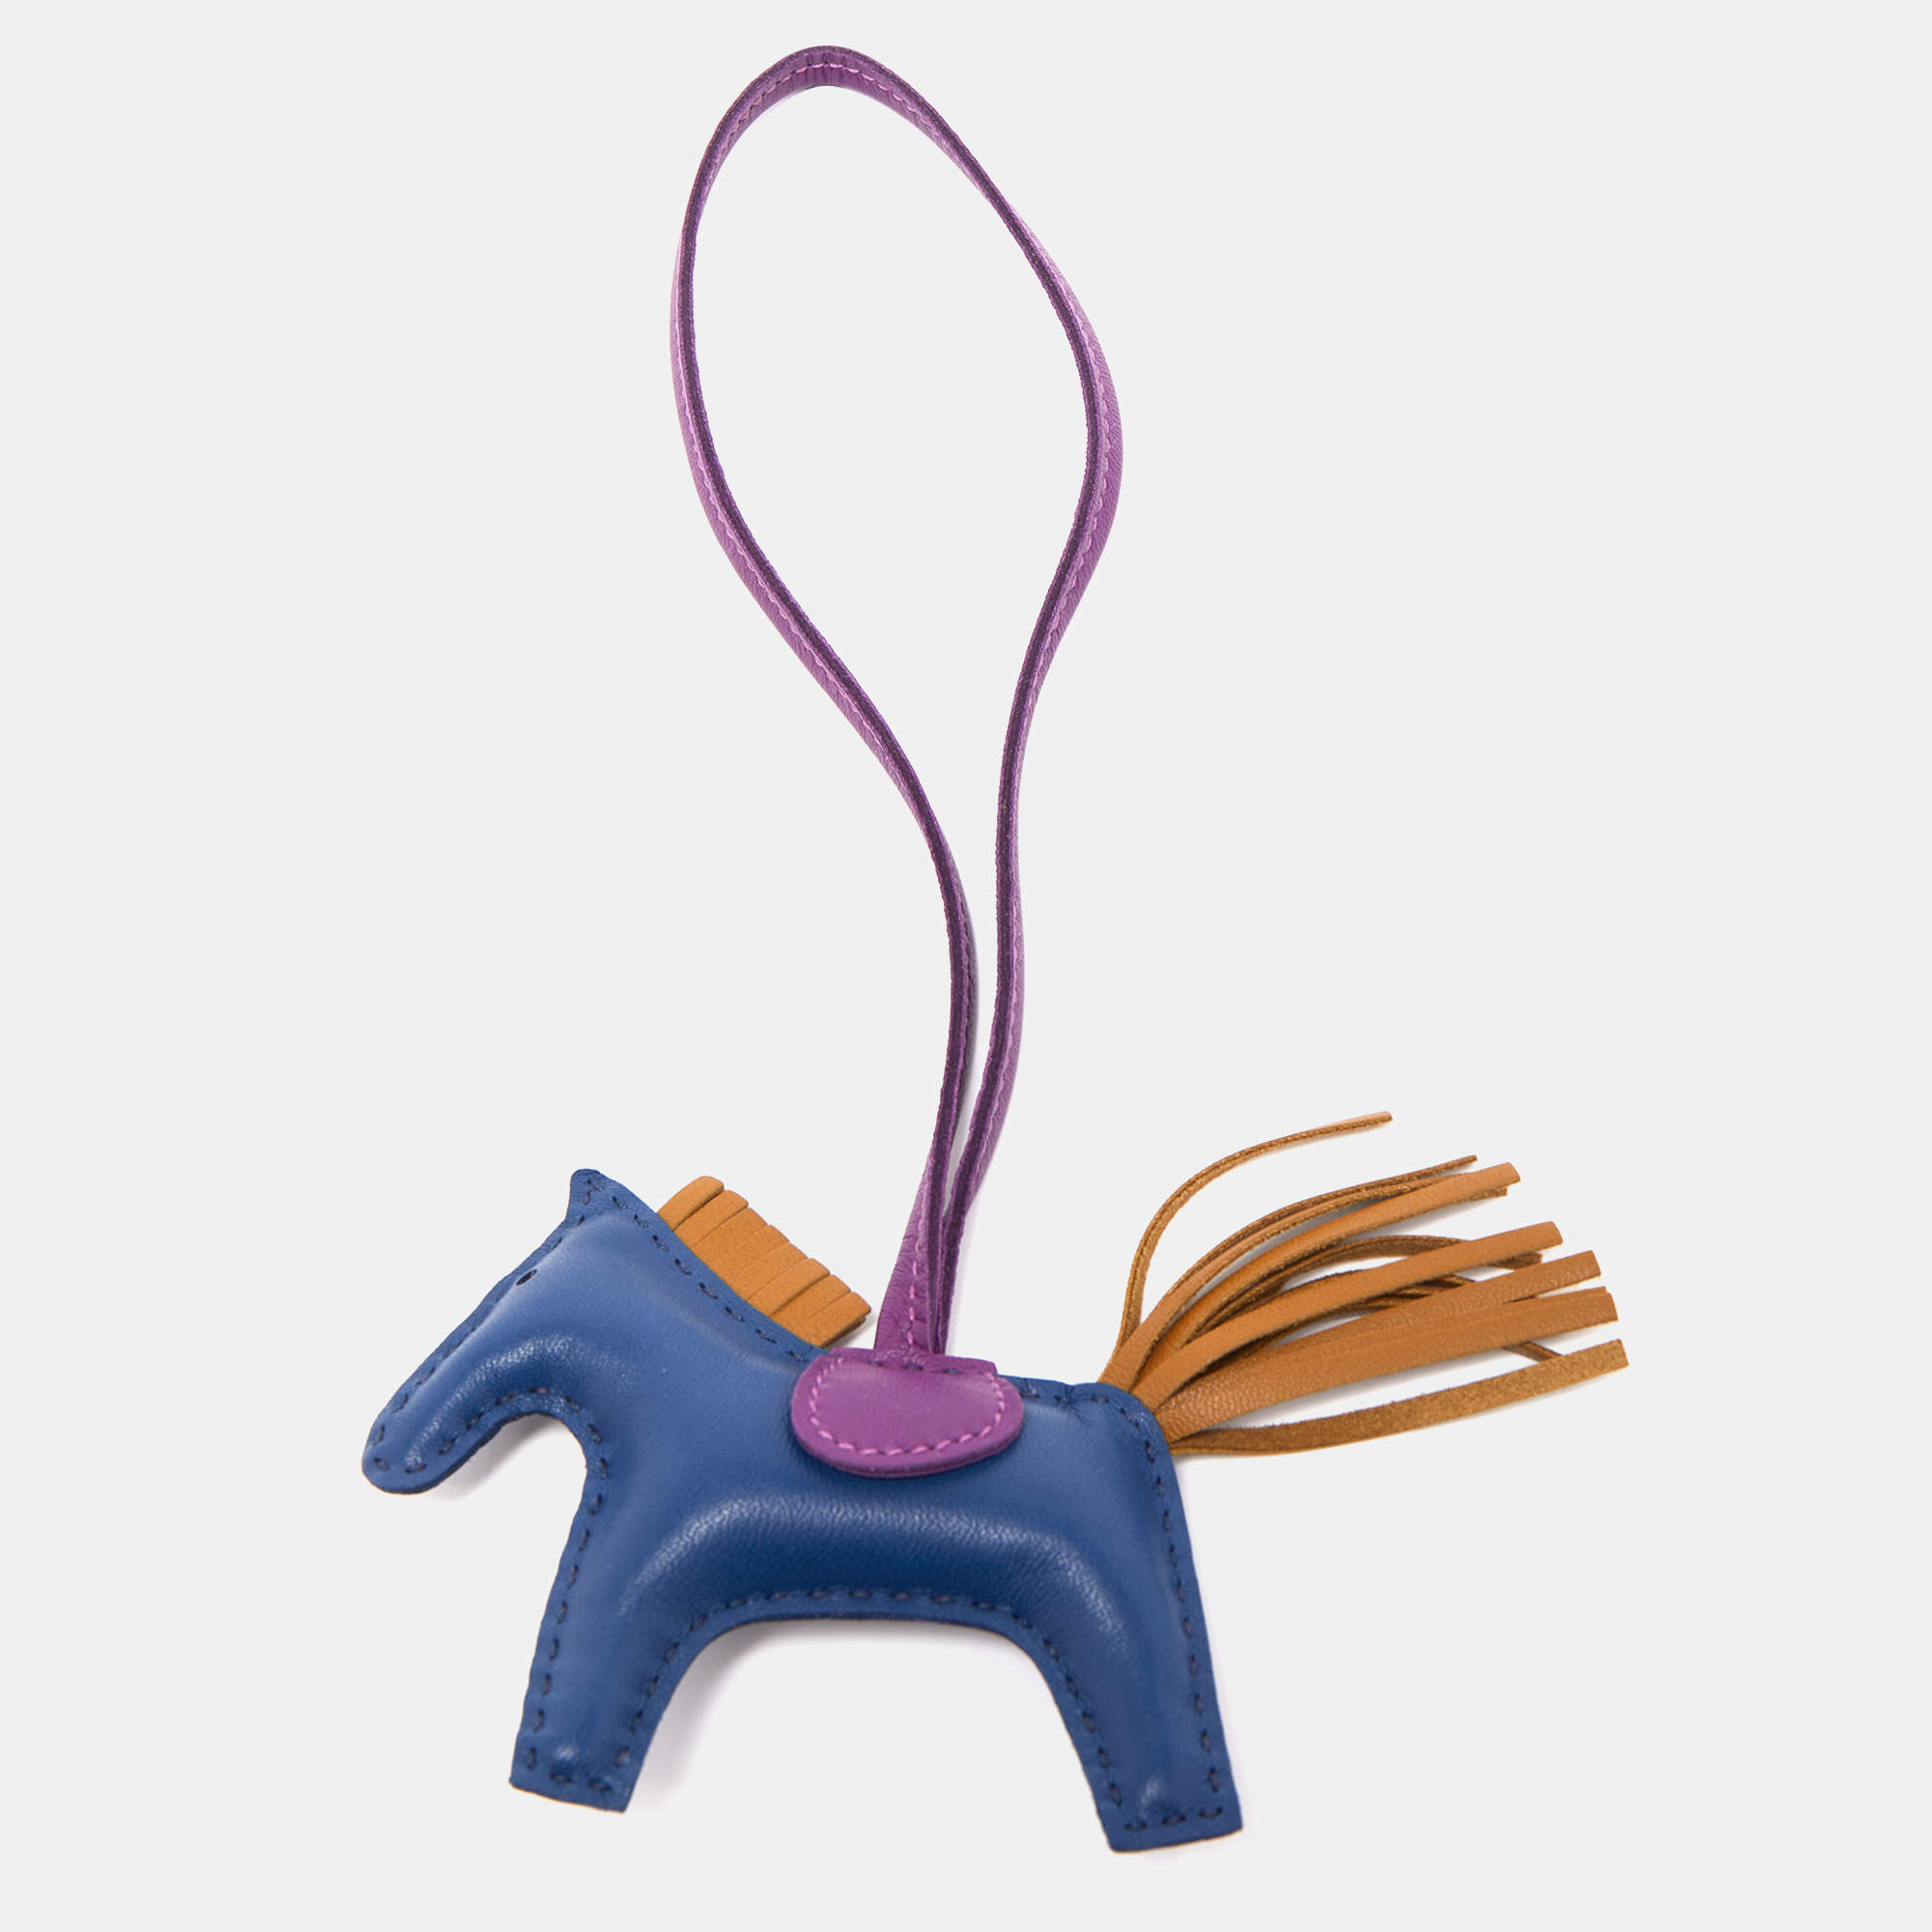 Hermes Rodeo Charm 